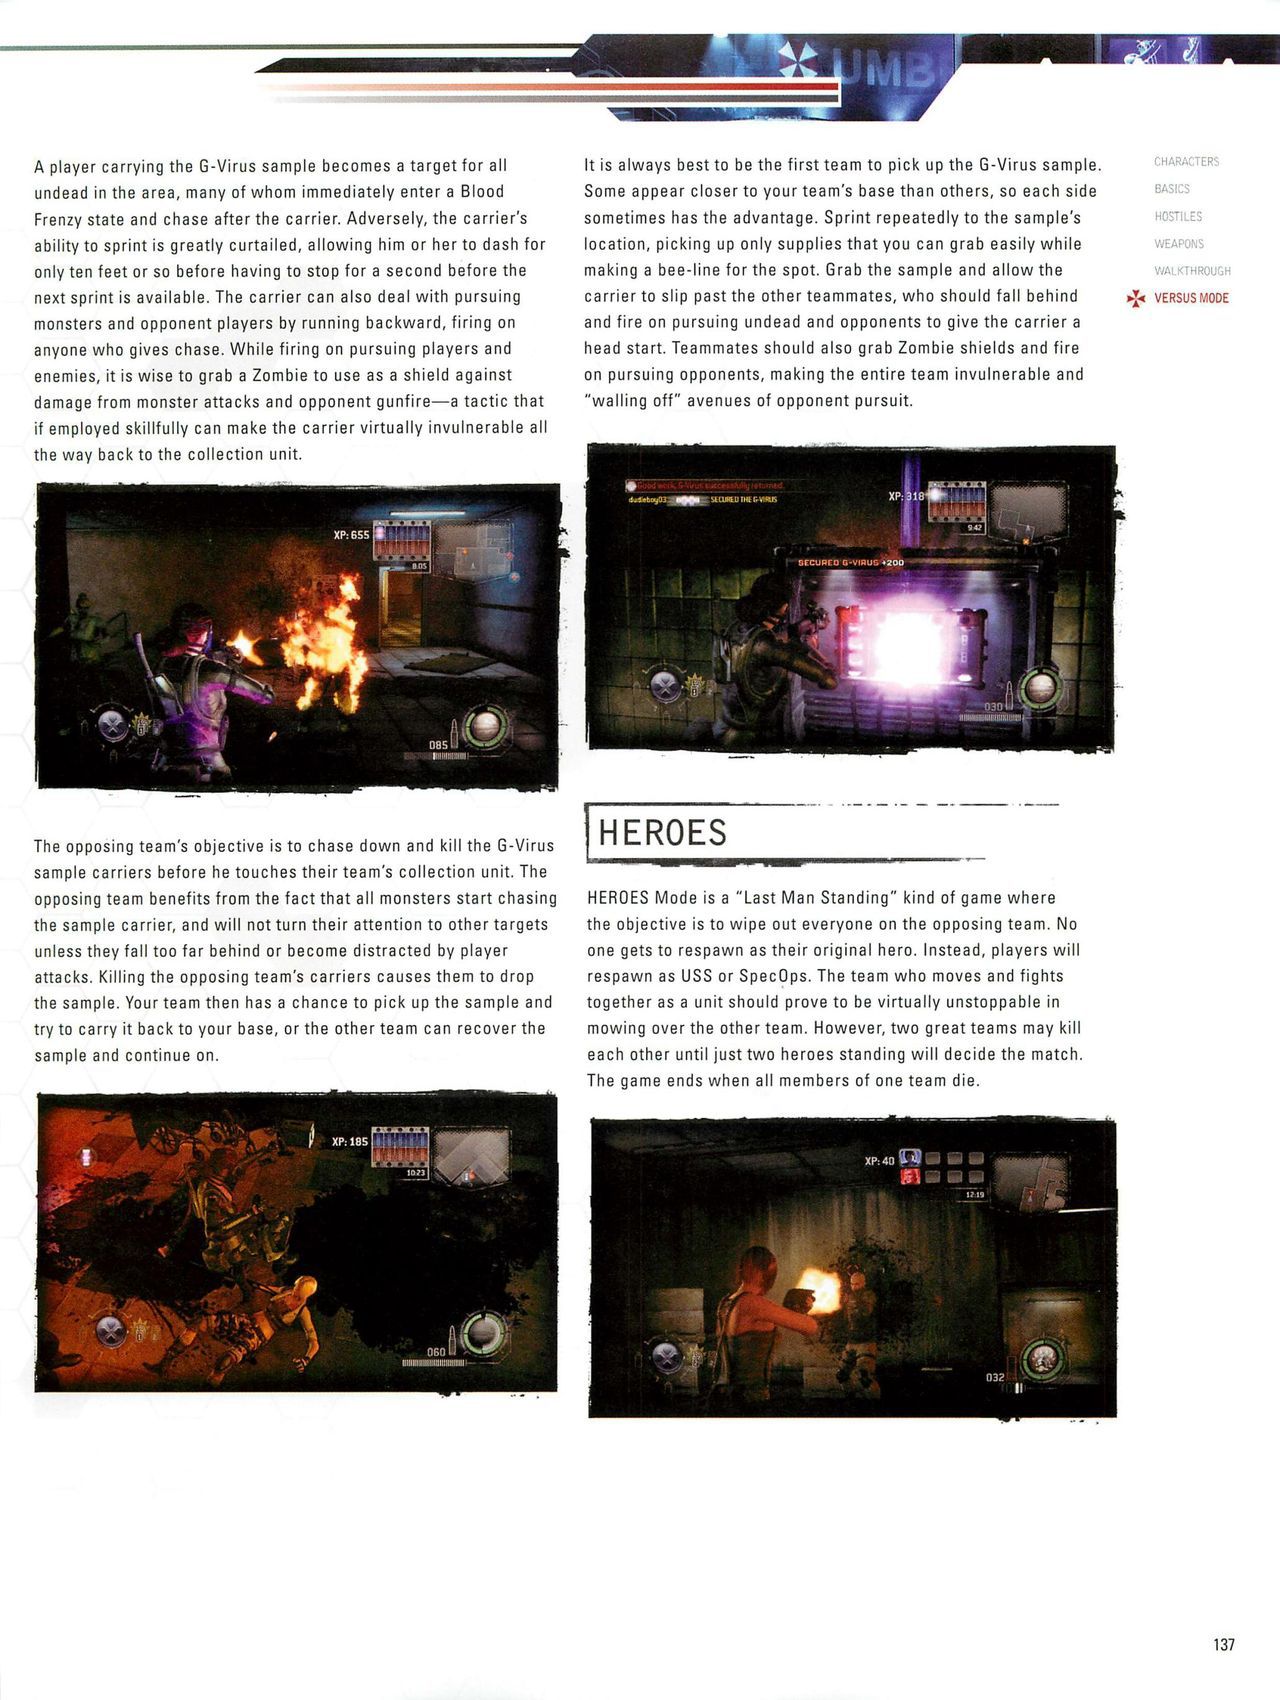 Resident Evil: Operation Raccoon City Official Strategy Guide (watermarked) 139